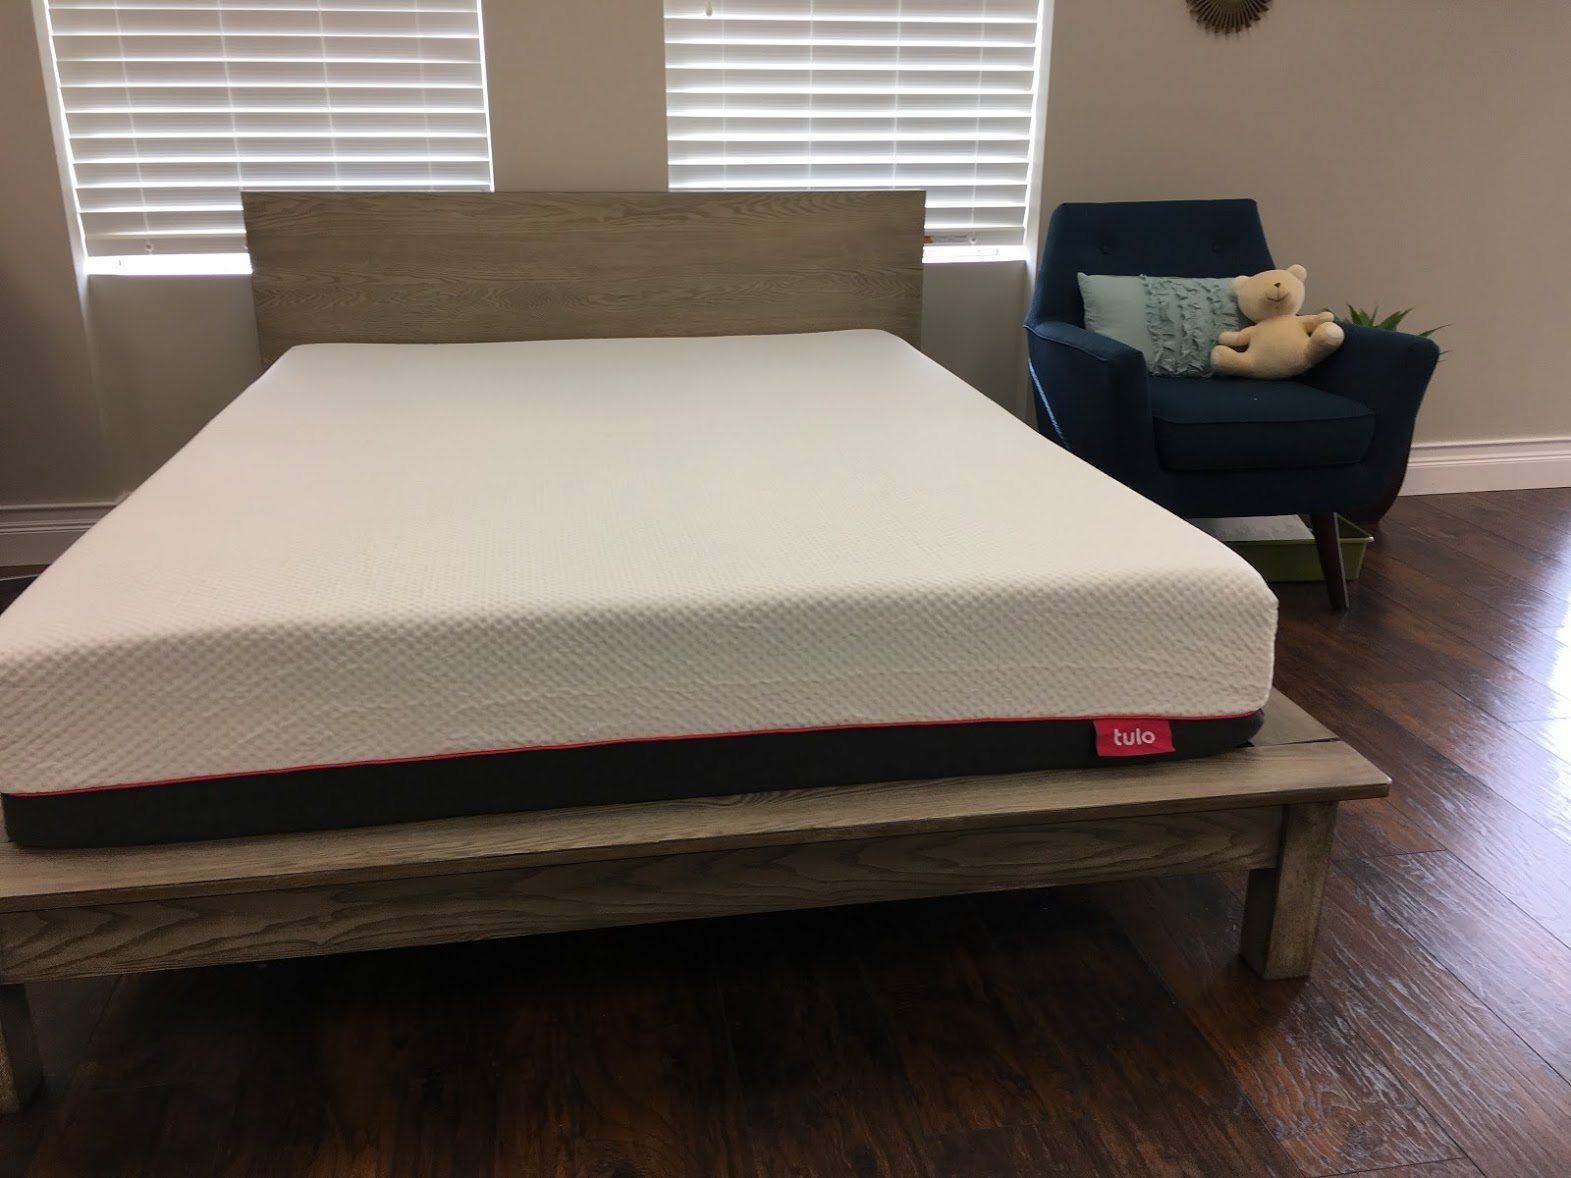 tulo Mattress Review